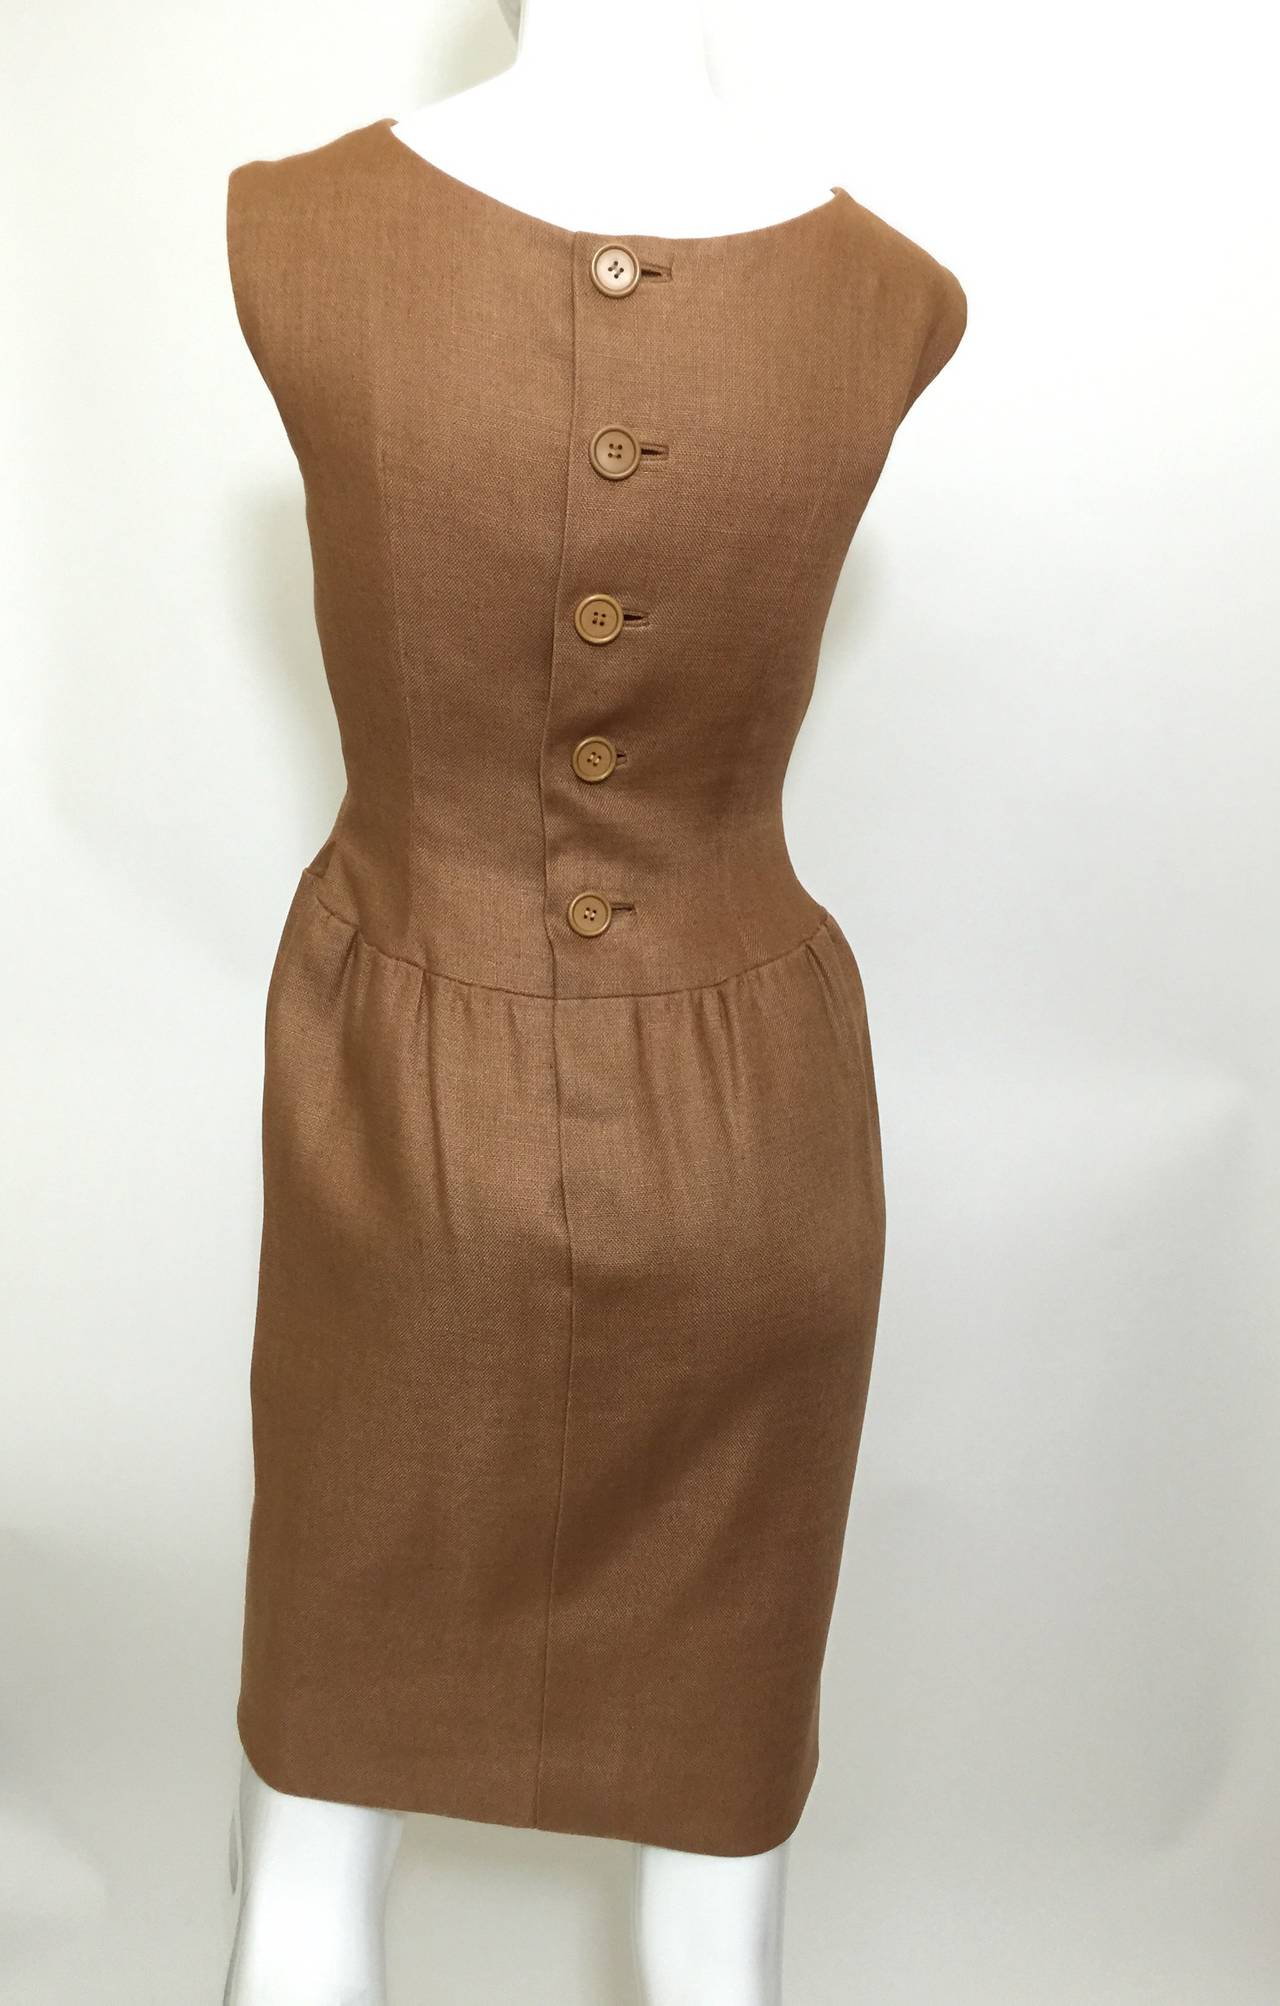 Norman Norell Dress as seen on Jacqueline Kennedy, 1960s For Sale 2